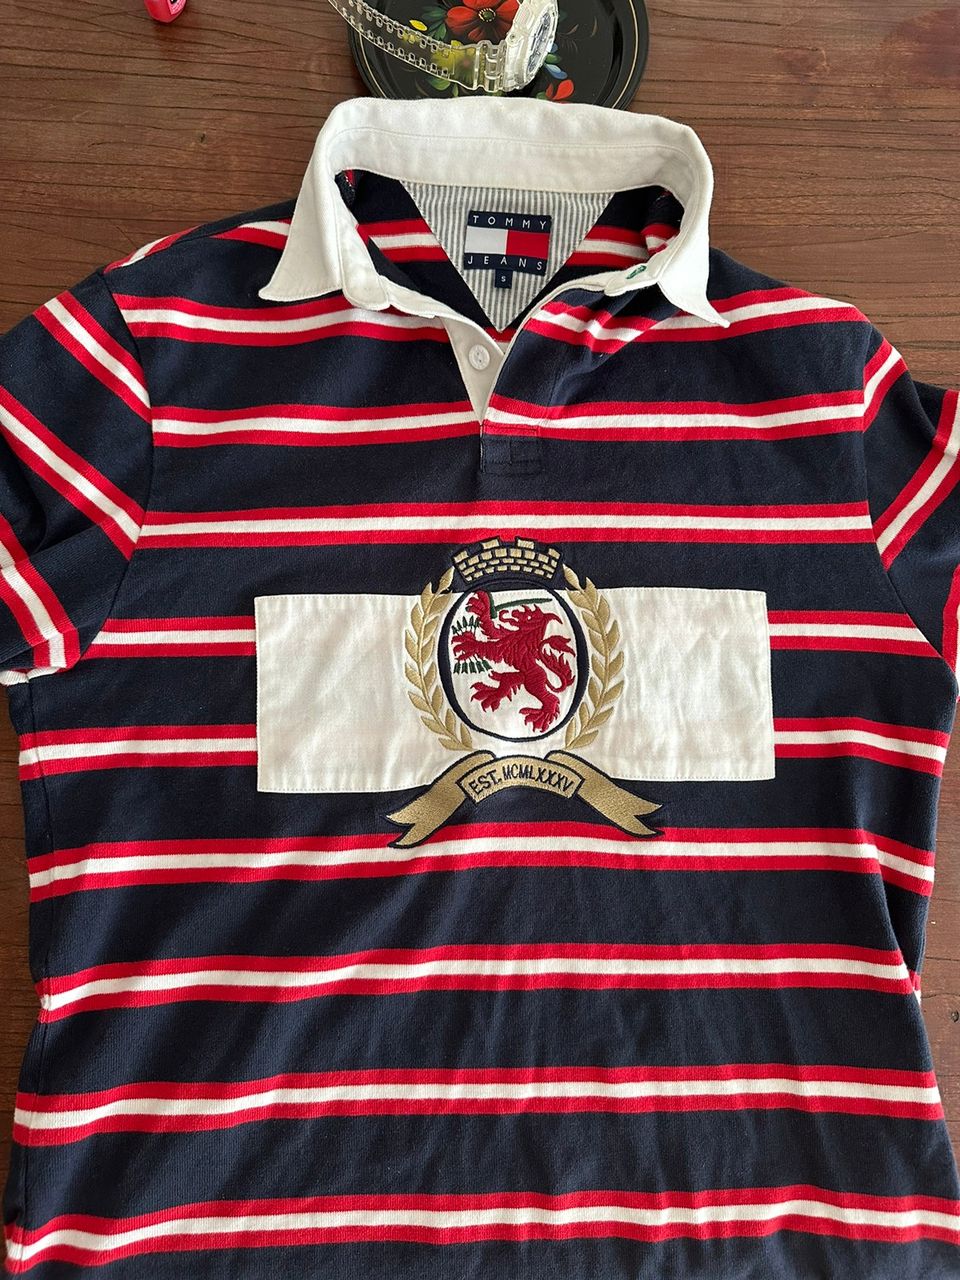 Tommy hilfiger rugby shirt